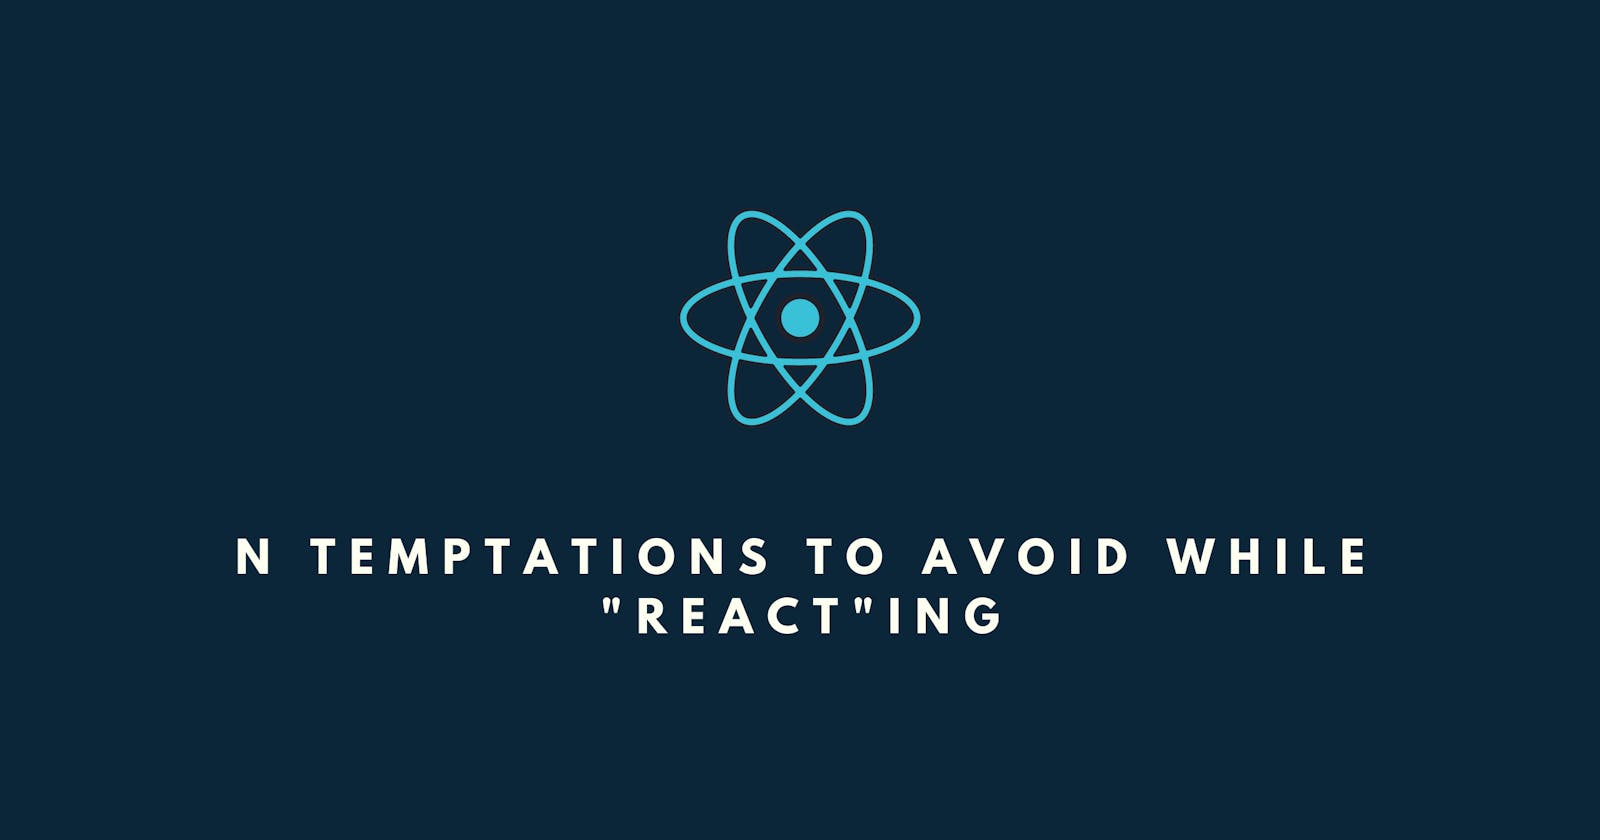 N Temptations To Avoid While "React"ing.